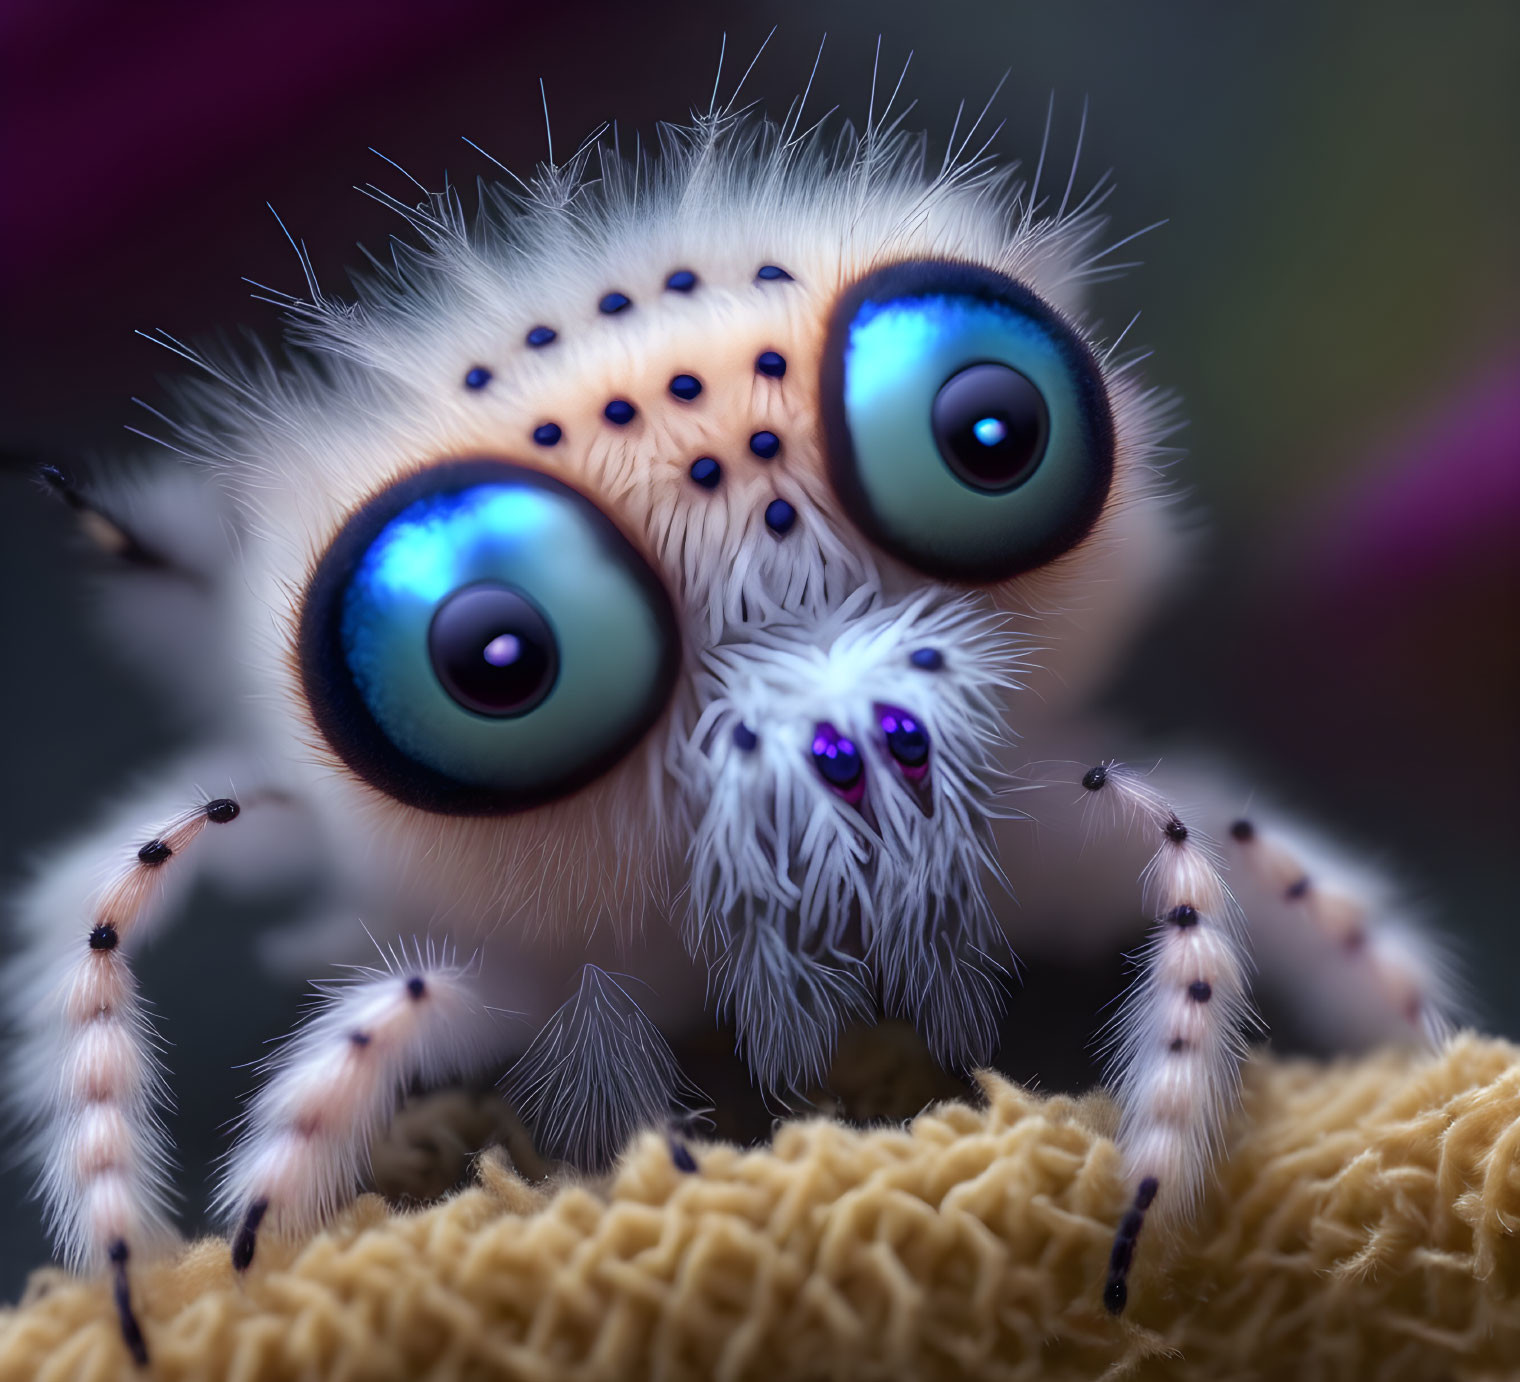 Stylized jumping spider with blue eyes in colorful setting